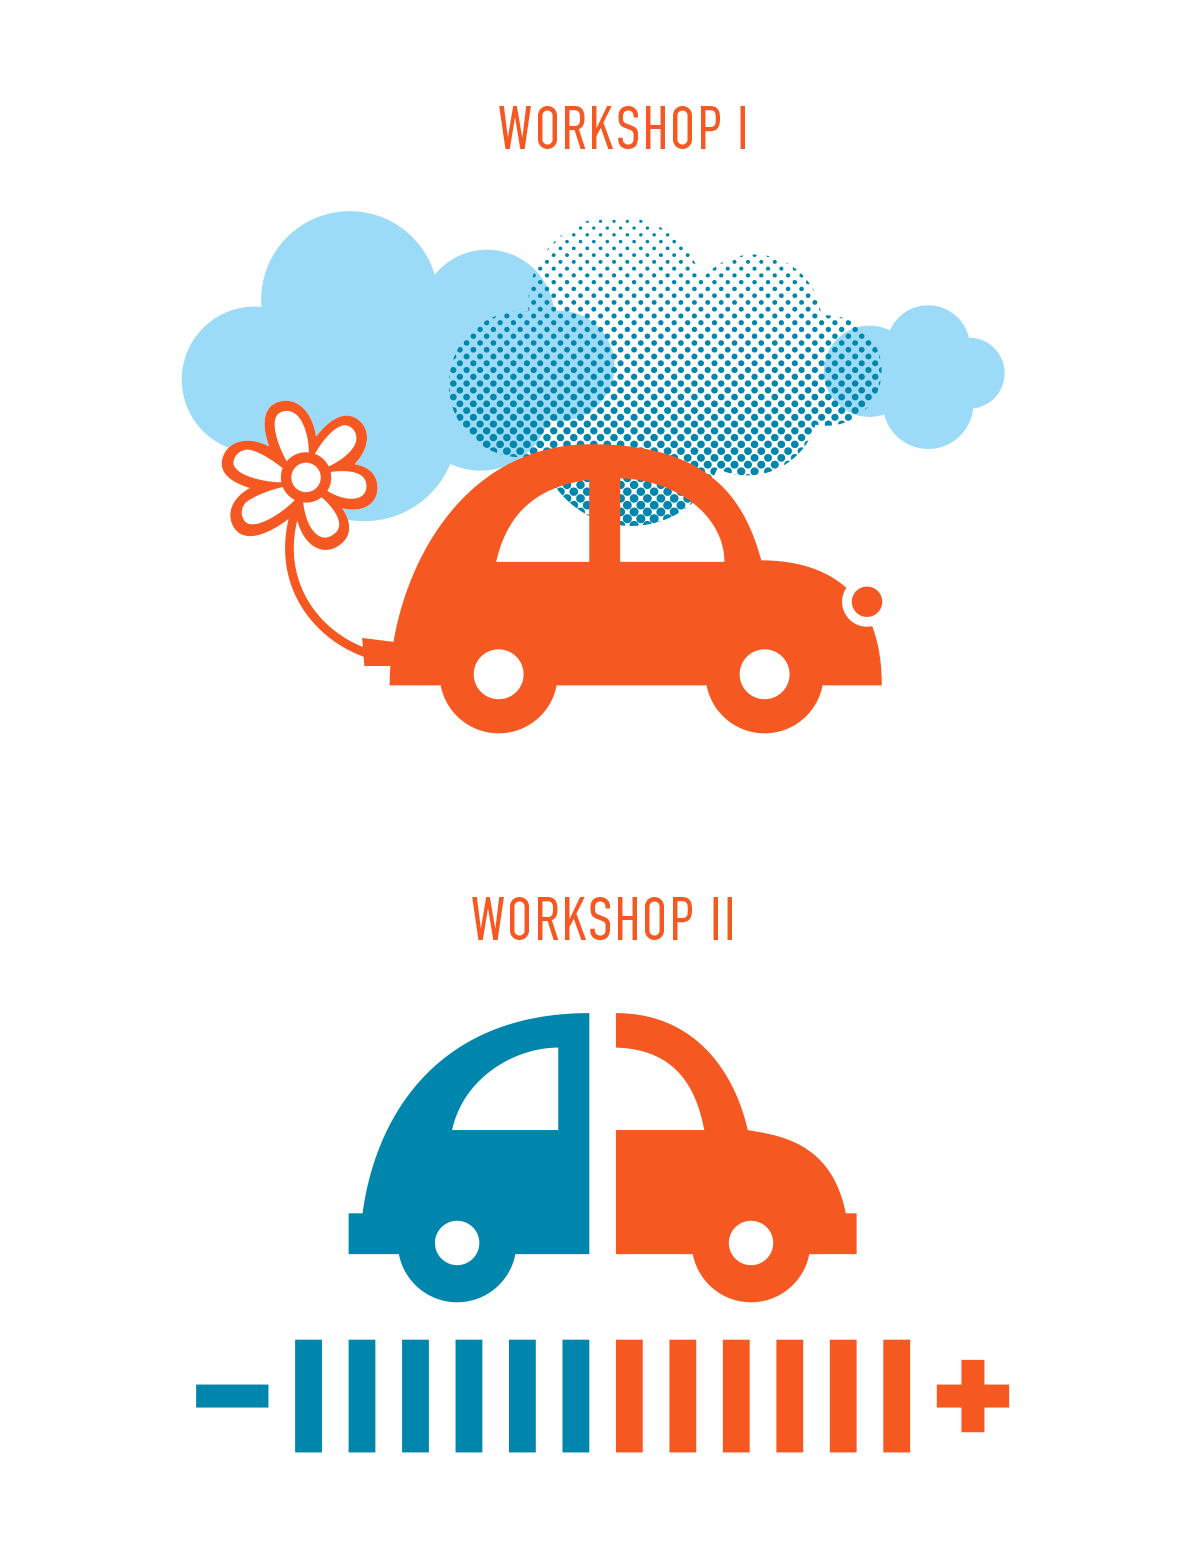 The visual identity for the APT-STEP workshops